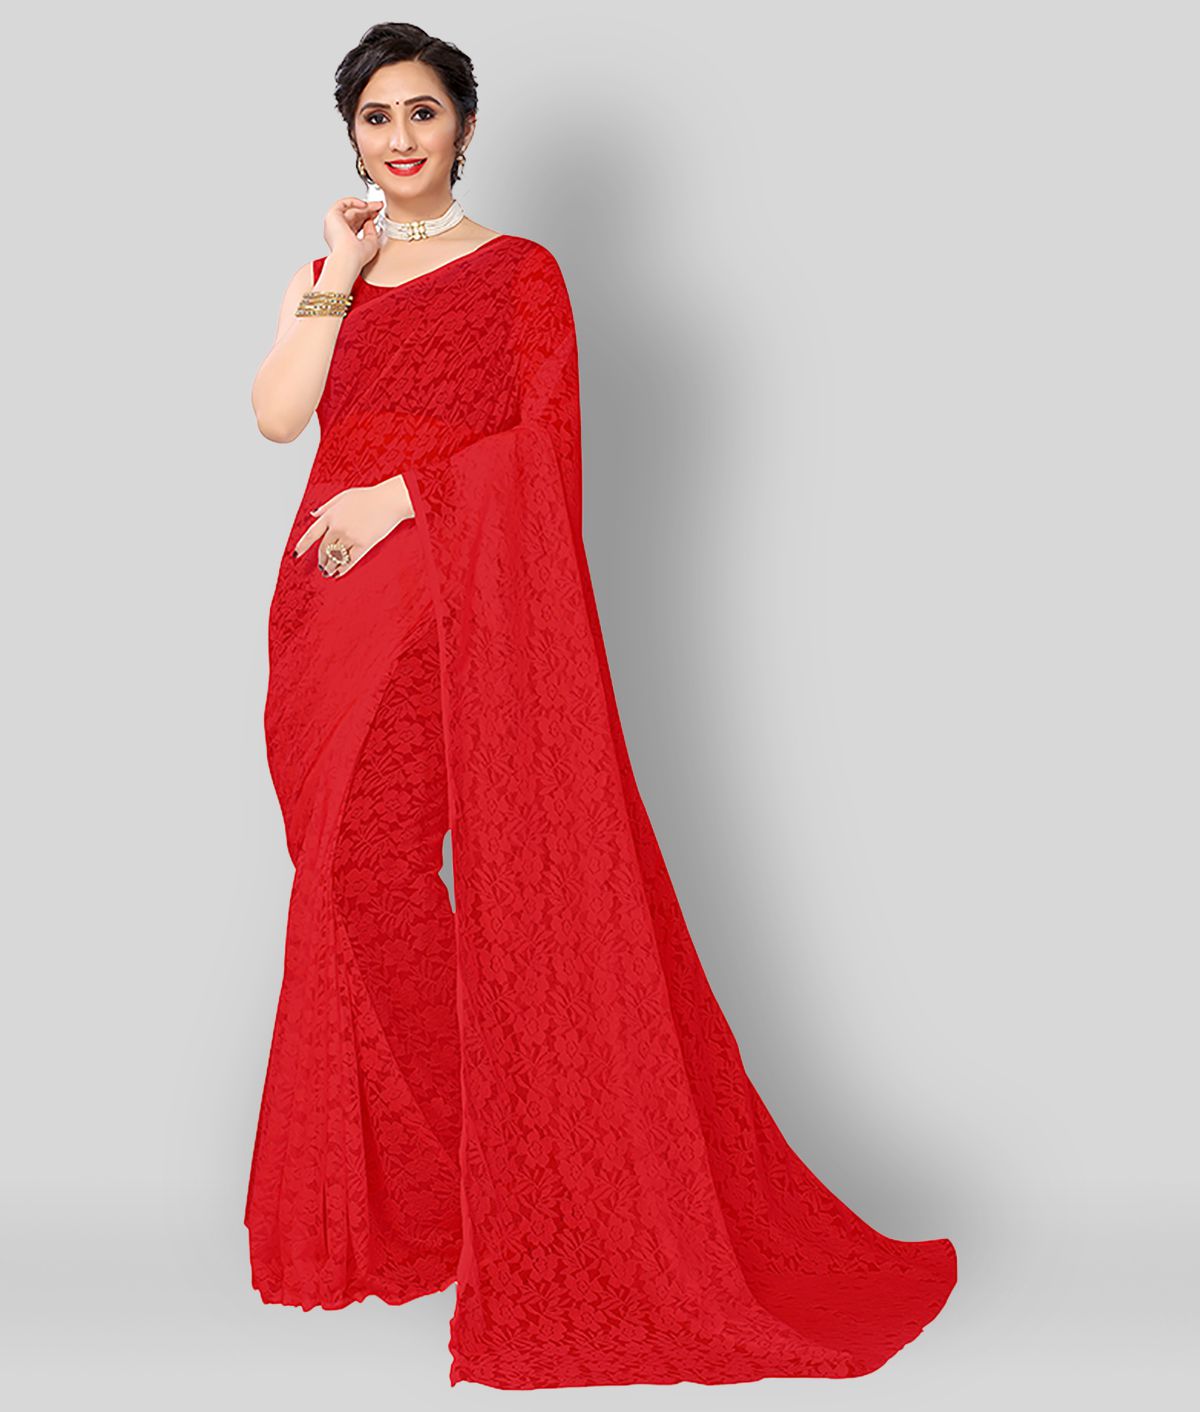 POSHYAA FASHION - Red Net Saree Without Blouse Piece (Pack of 1)